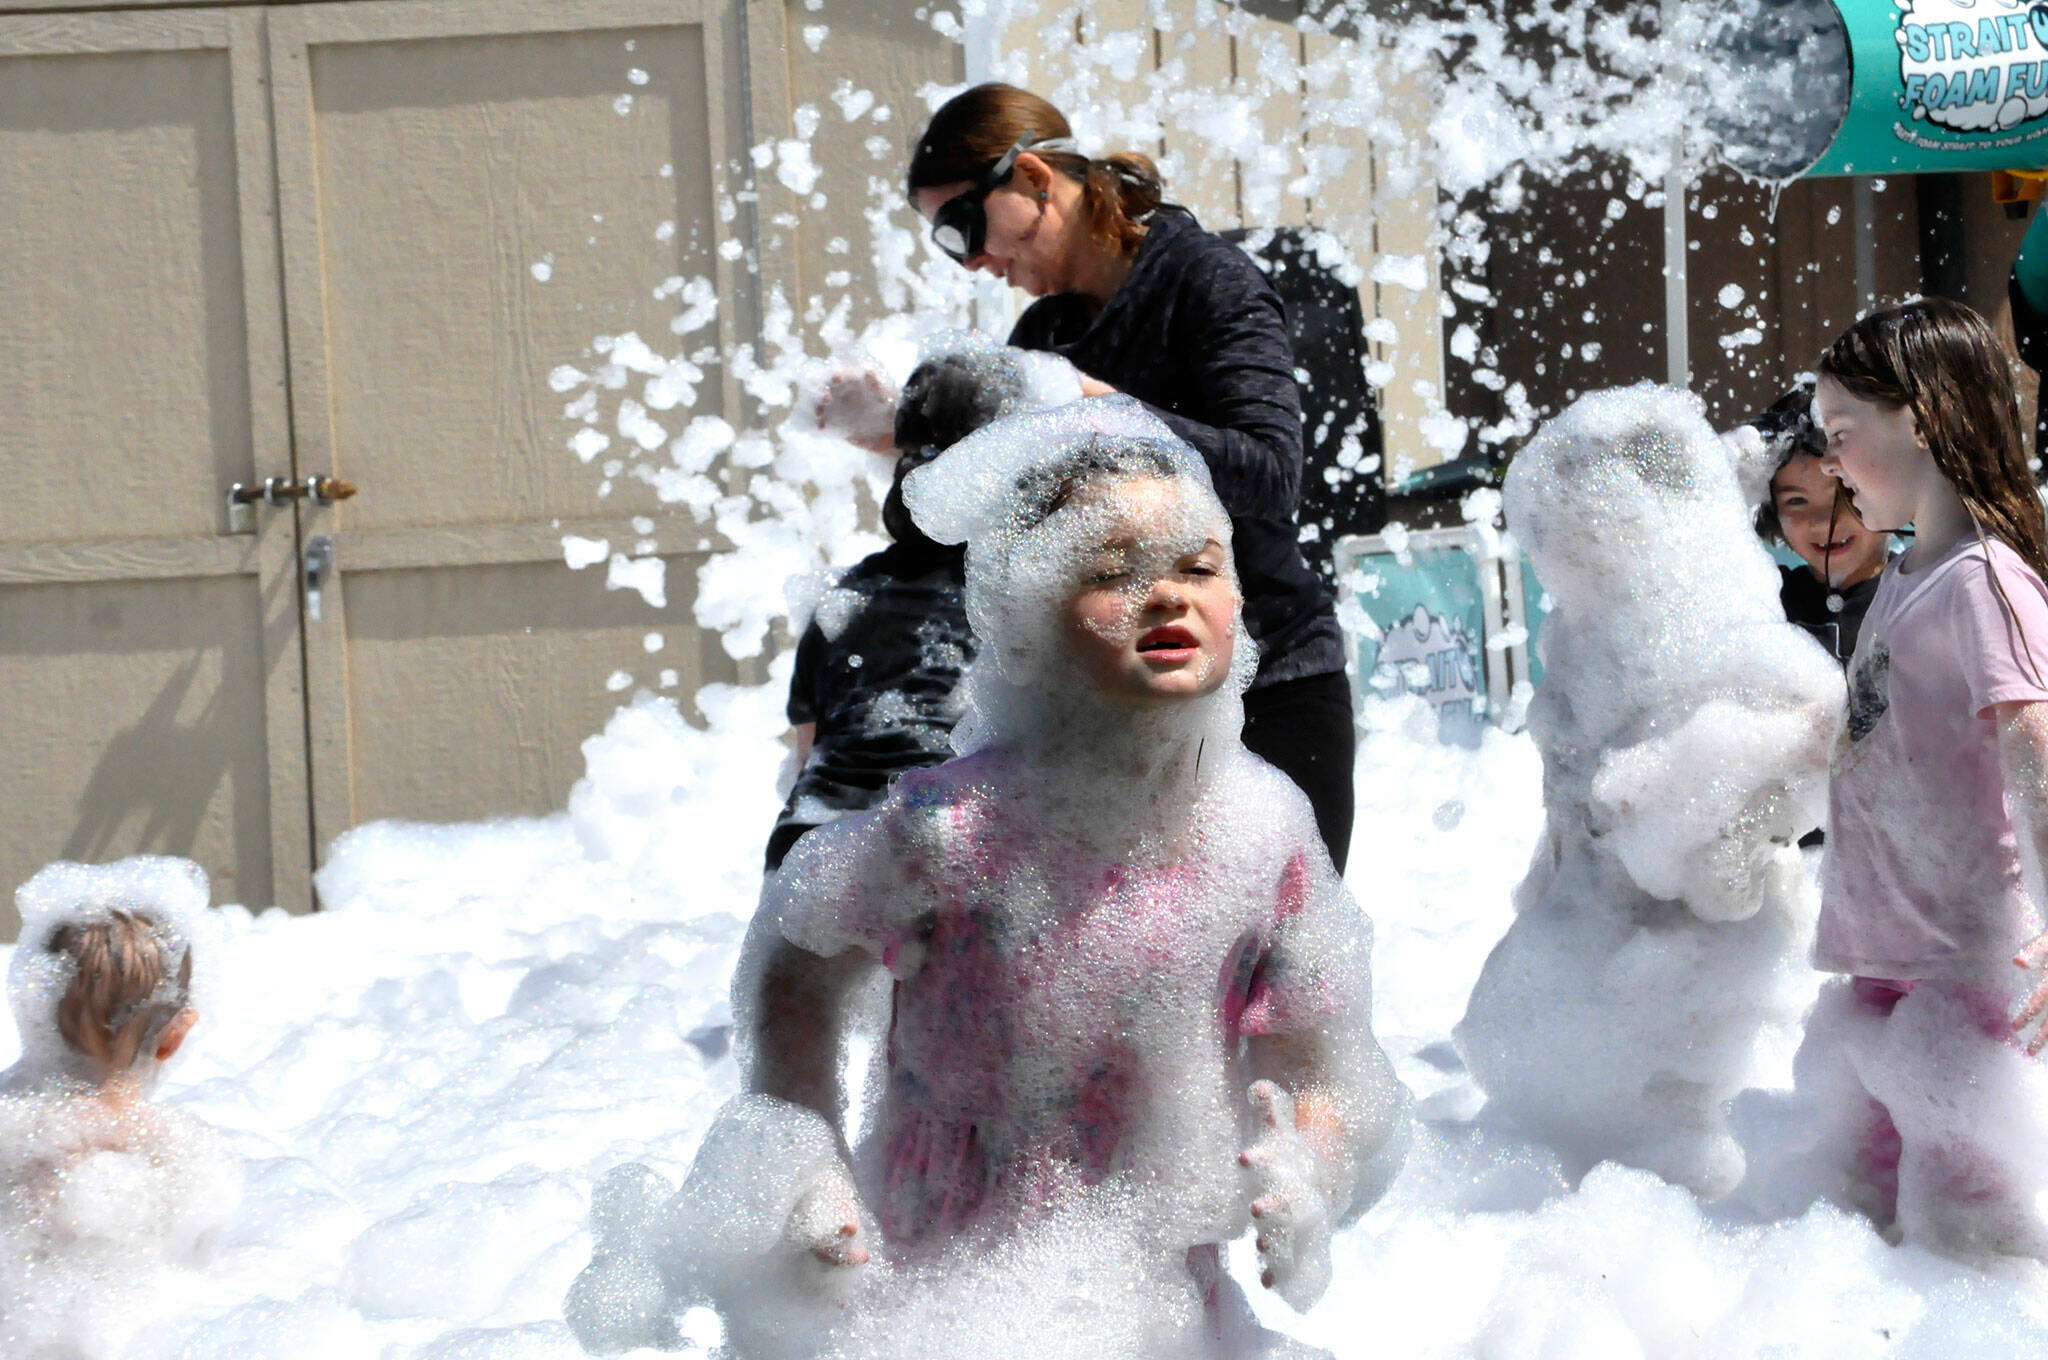 Sequim Gazette photo by Matthew Nash/ Six-year-old Lyla Huffman of Sequim plays in the foam during the Irrigation Festival’s Family Fun Days on Sunday. Her mom said she was “having a blast.” Local business Strait Up Foam Fun came to Carrie Blake Community Park to offer children and adults the chance to play in the eco-friendly, biodegradable foam for hours.